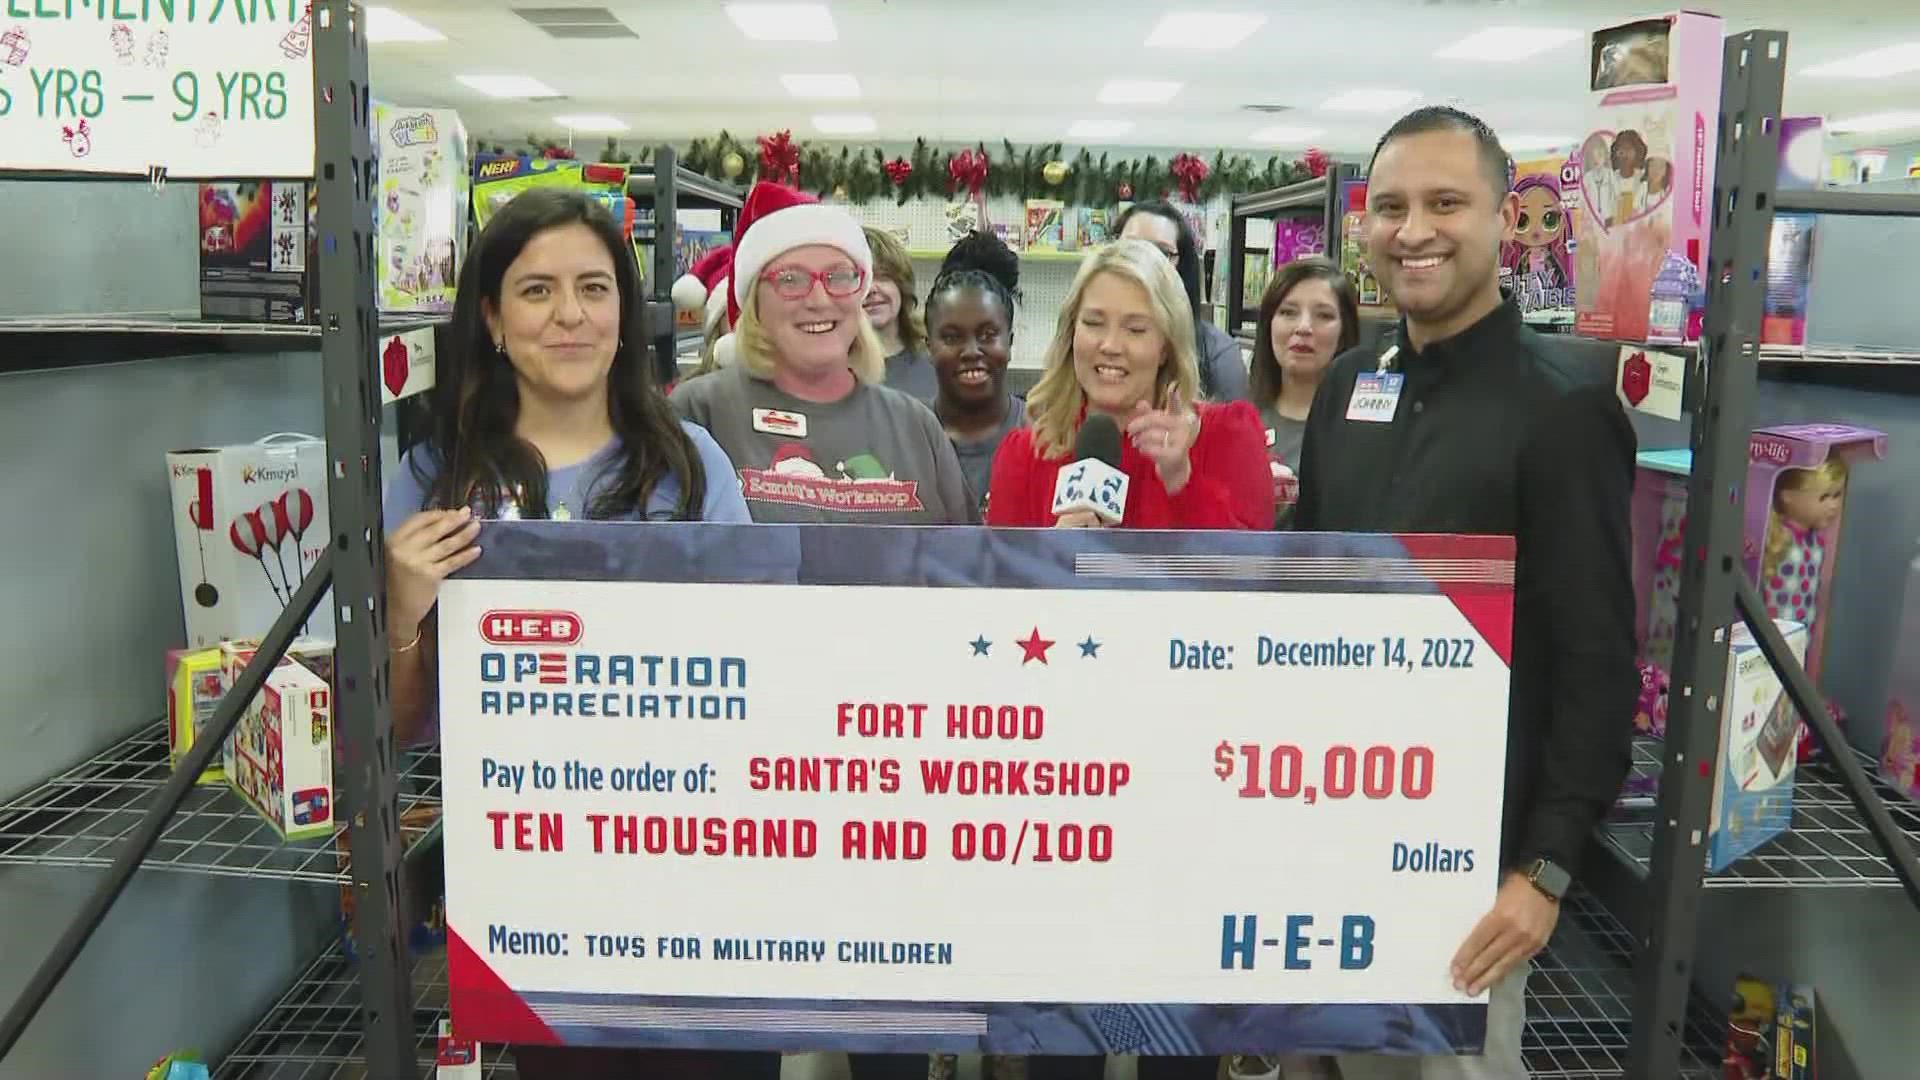 The non-profit is working with 6 News and H-E-B for Camo Santa to provide toys to Fort Hood military children this holiday season.